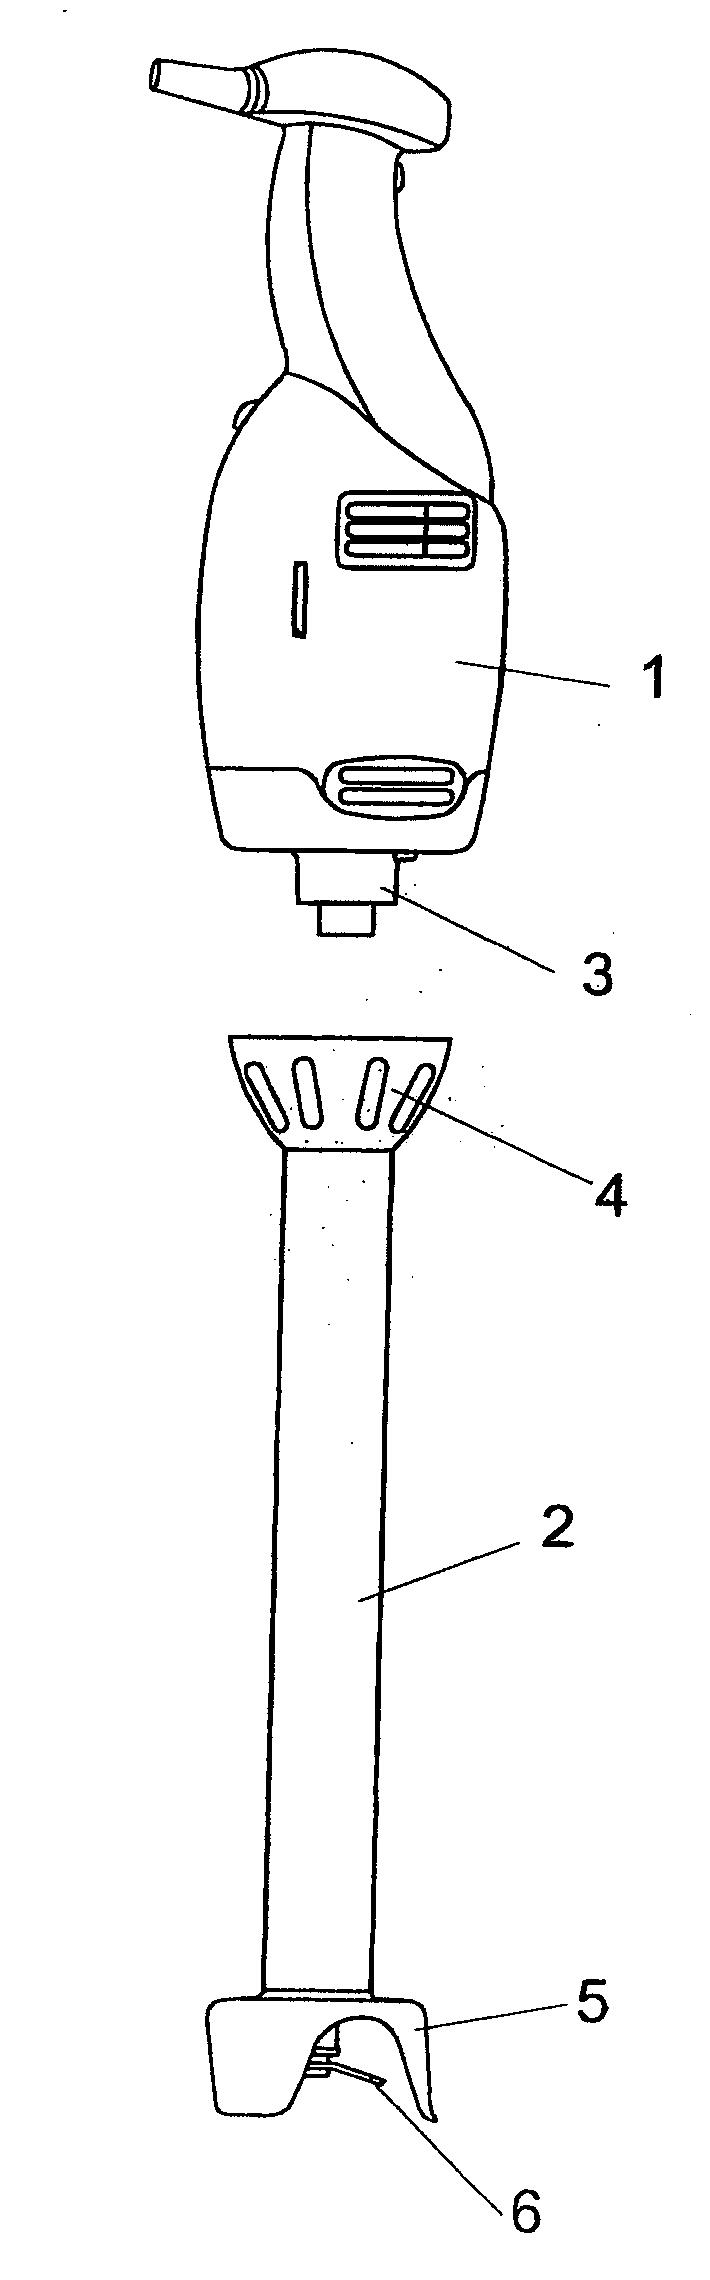 Releasable Coupling Device Between a Tool Shank and a Motor Assembly in Hand-Held Blenders